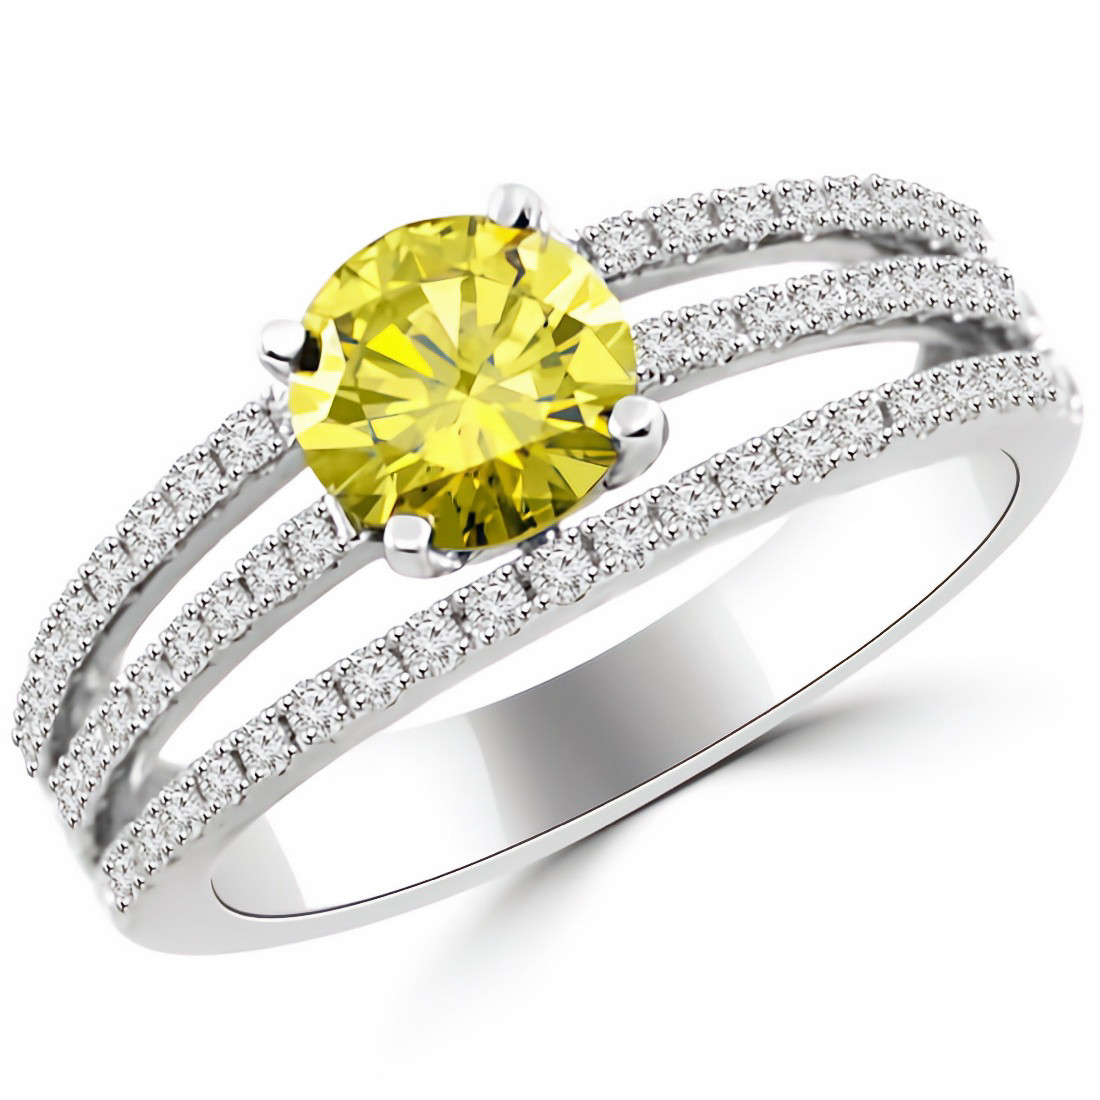 Unique Canary Yellow Diamond Engagement Ring 18k Gold